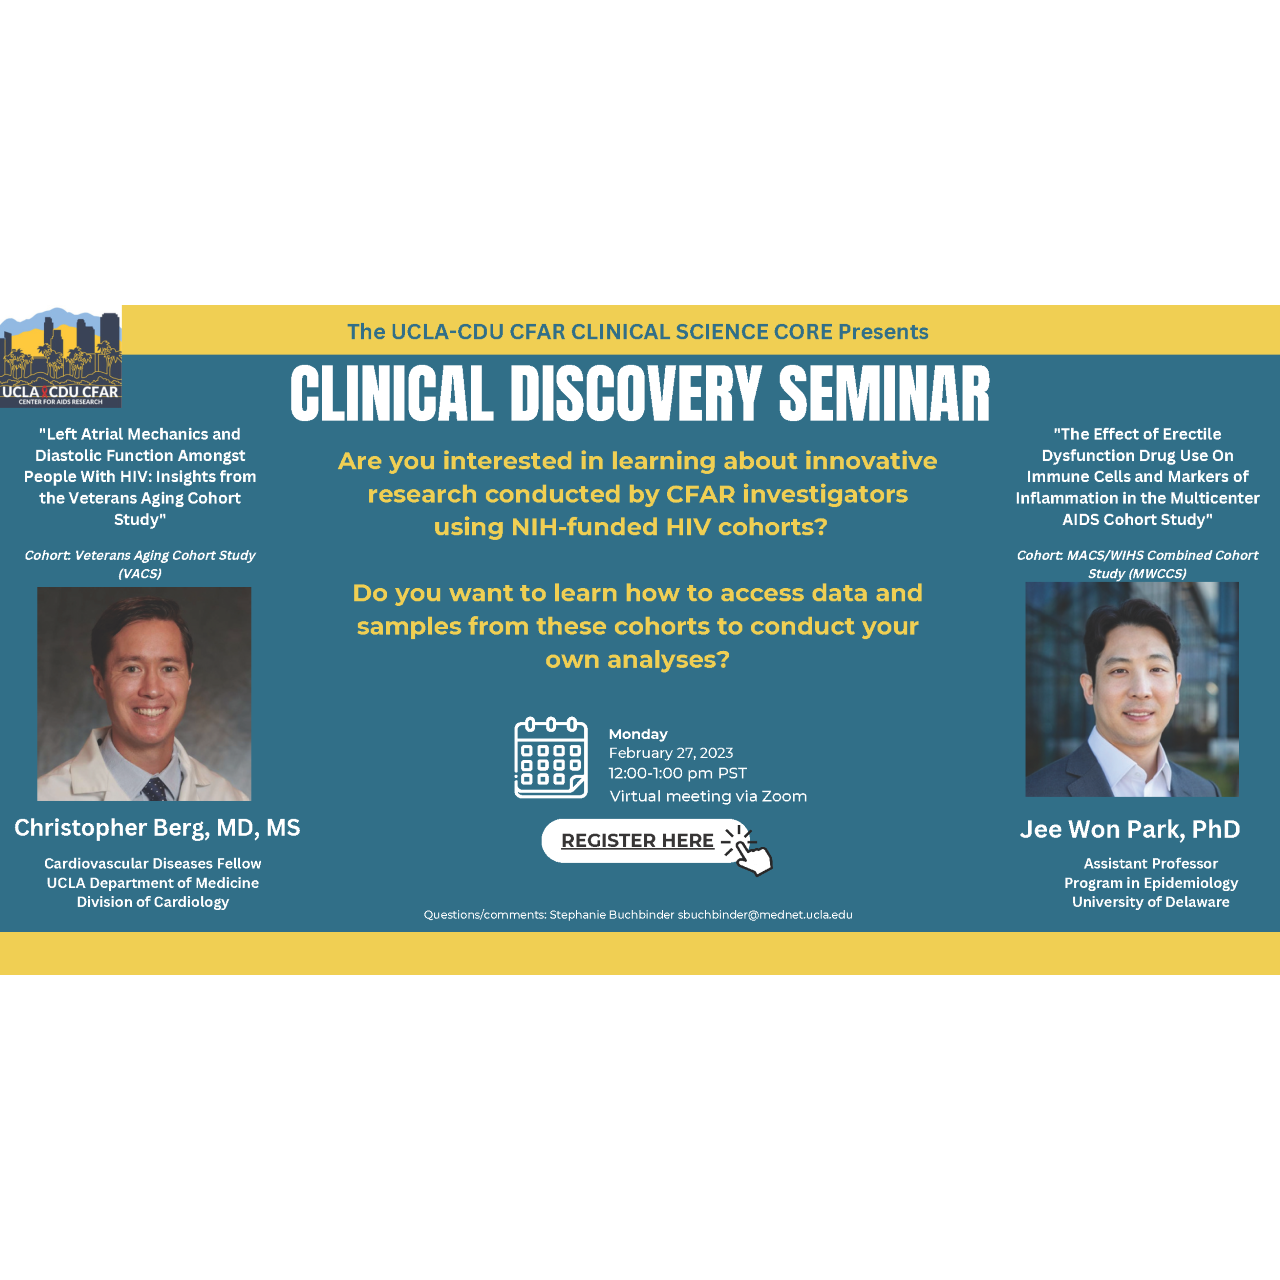 Clinical Discovery Seminar Monday, February 27th